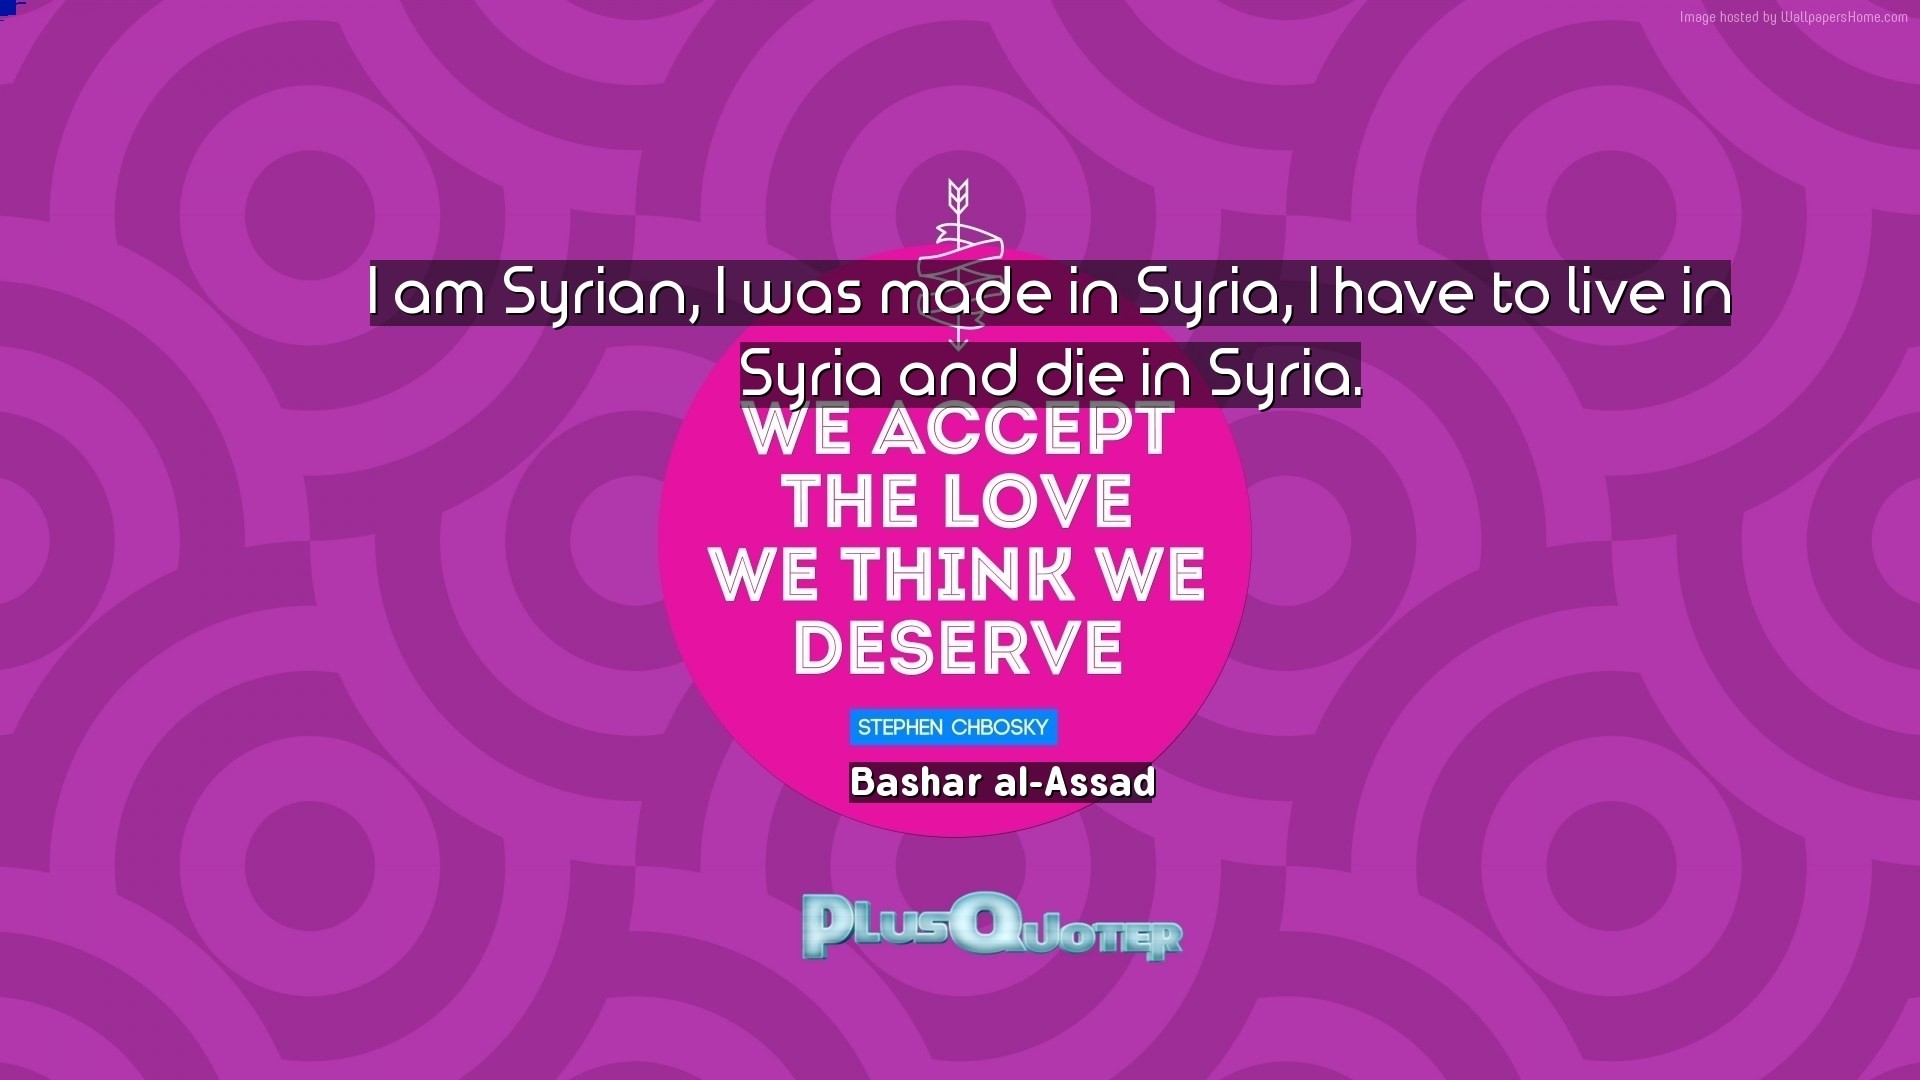 1920x1080 Download Wallpaper with inspirational Quotes- "I am Syrian, I was made in  Syria